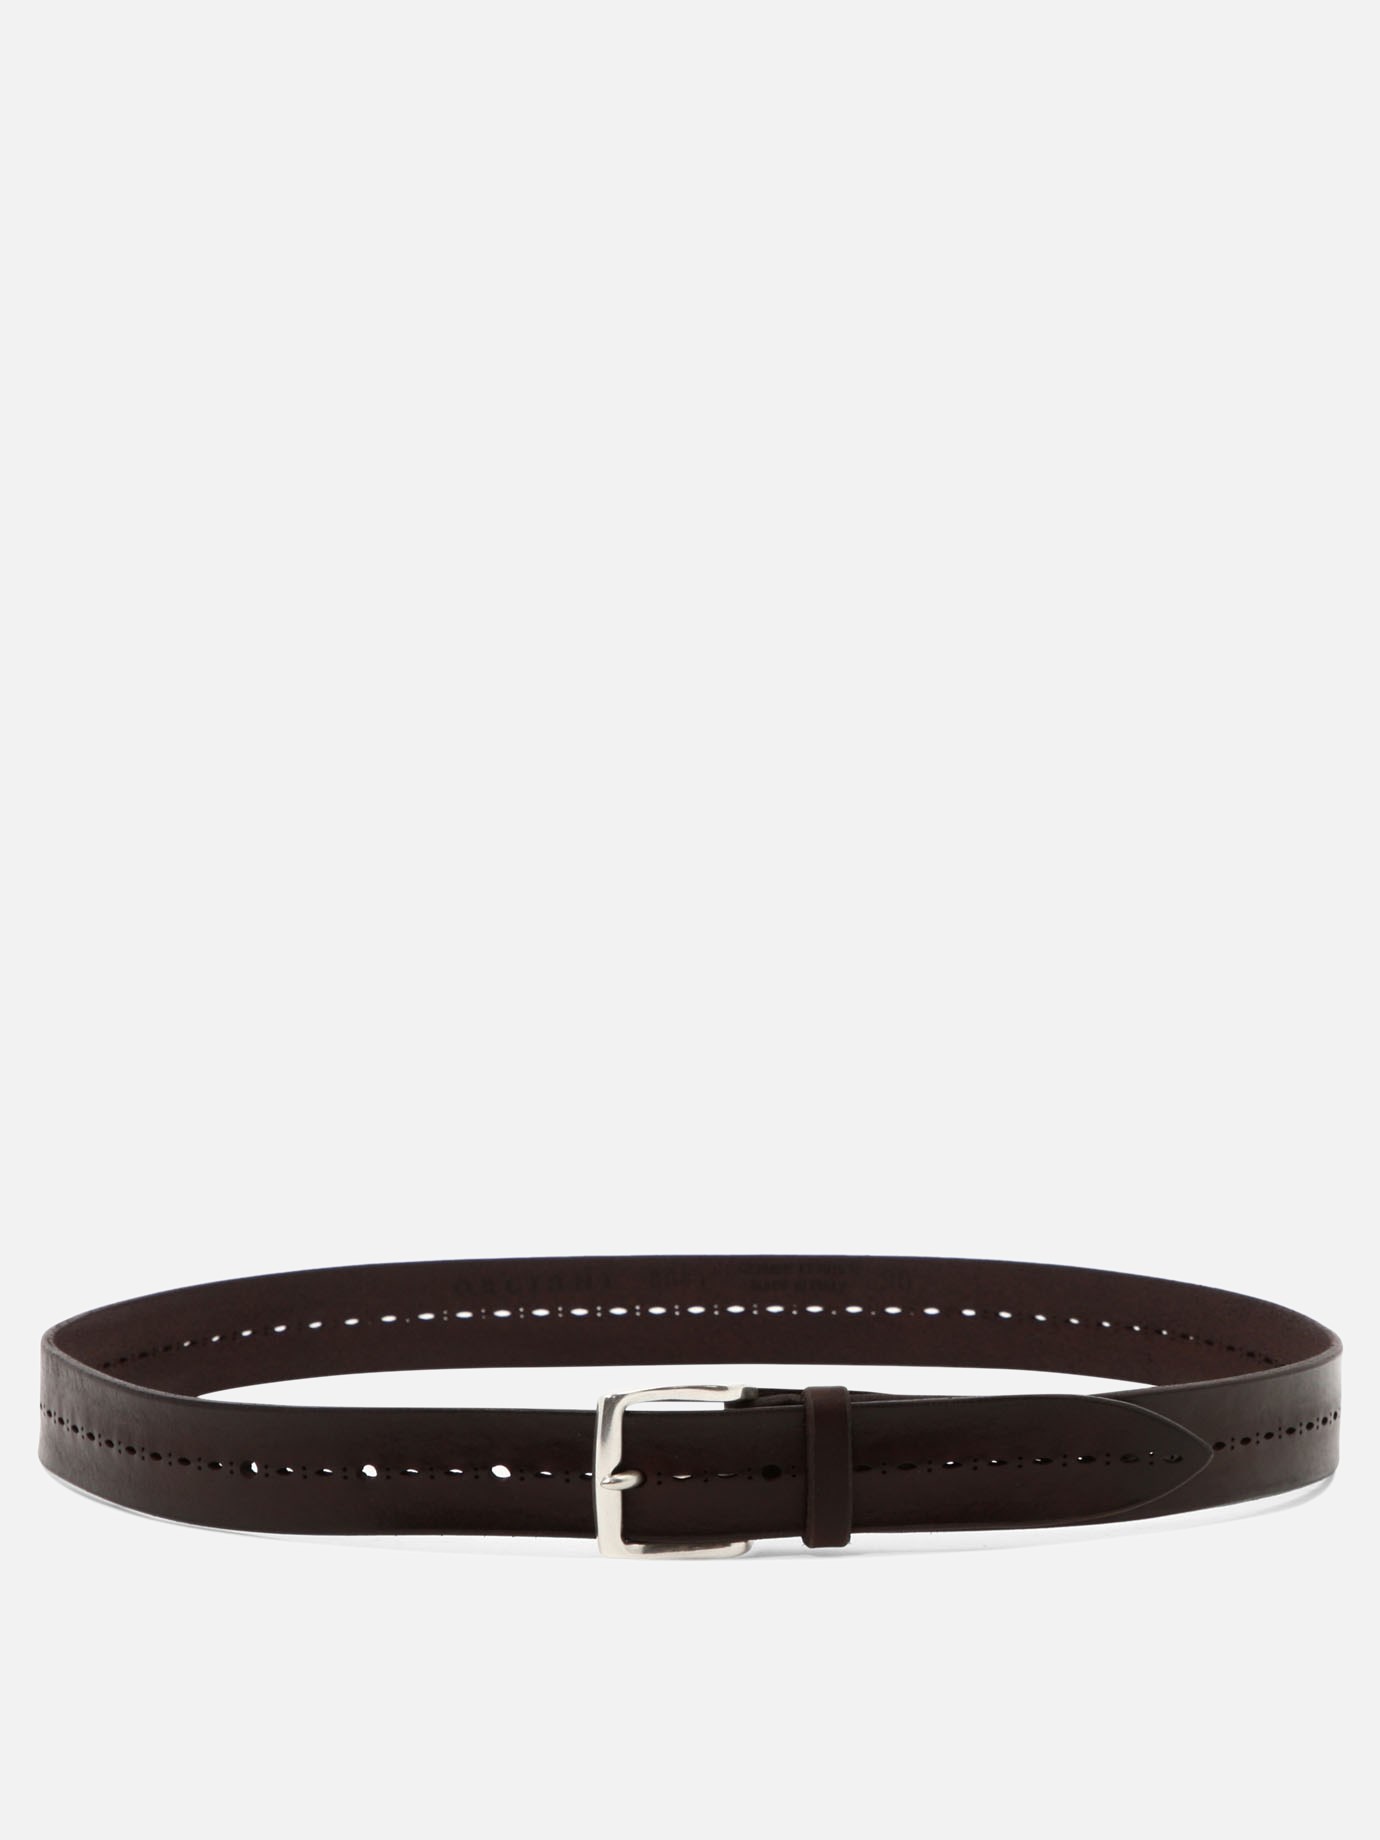  Bull Soft  beltby Orciani - 4